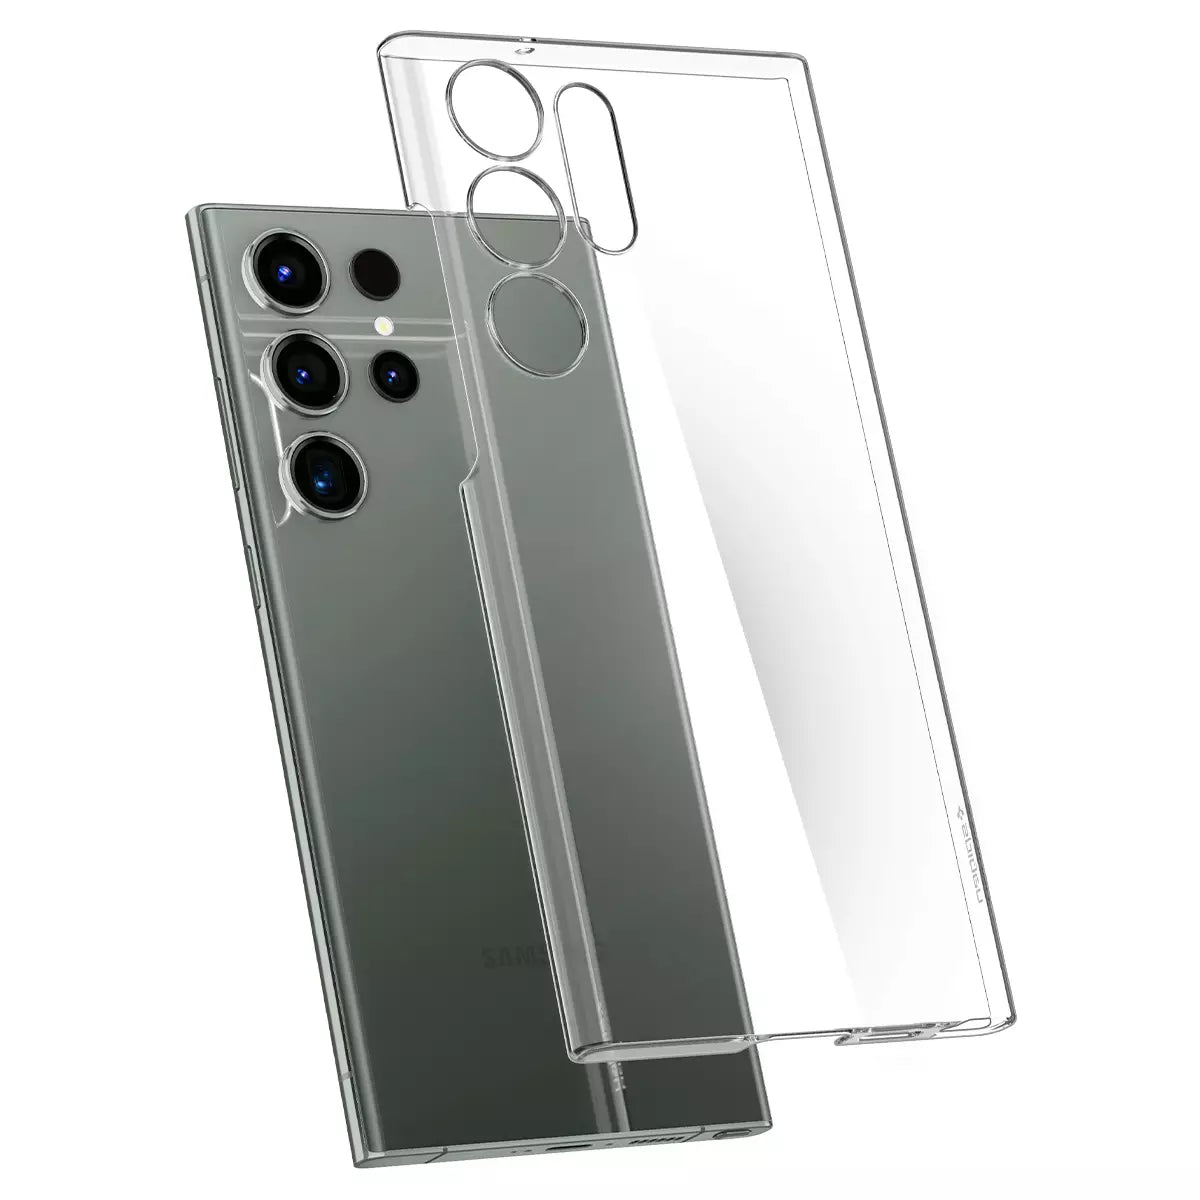 Crystal Clear Case for Samsung Galaxy S23 Ultra. Soft Slim Fit Transparent Plastic